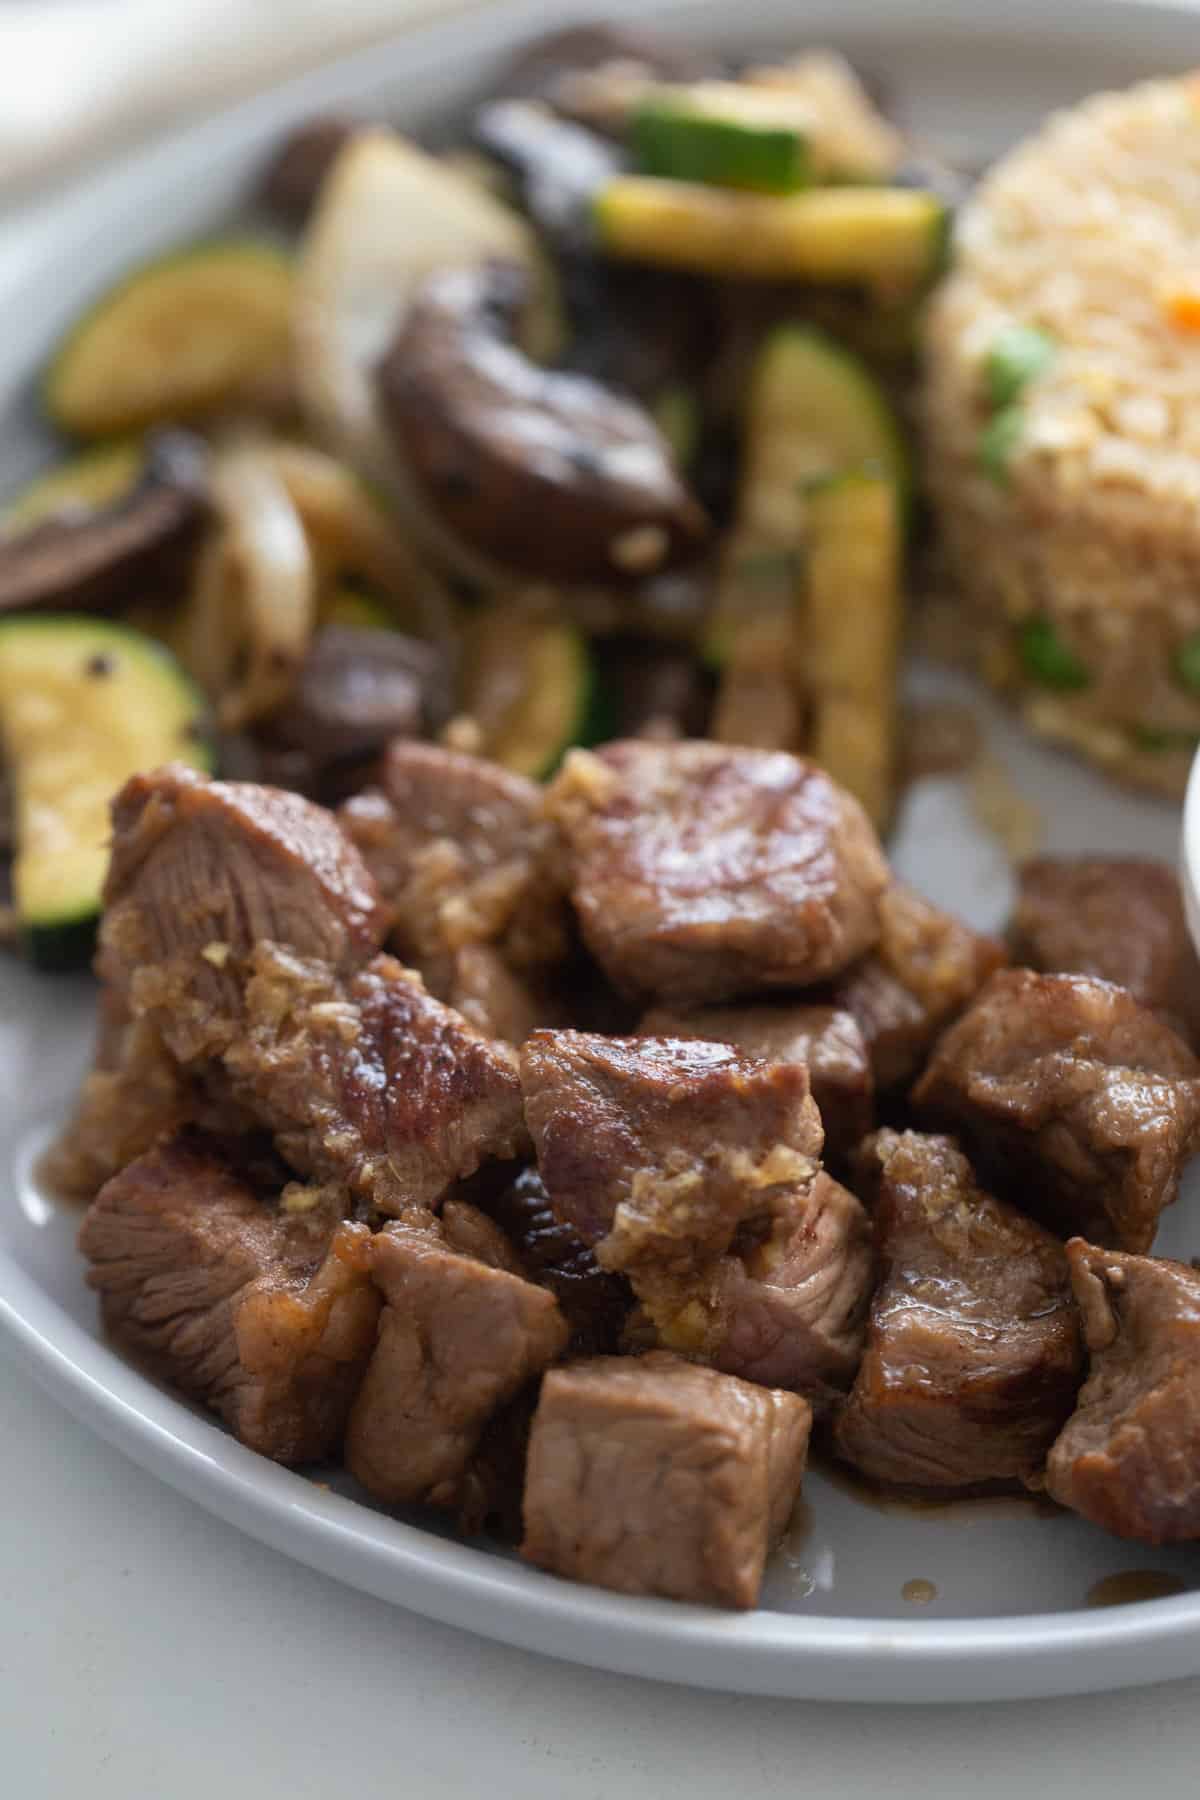 Cubed steak drizzled with ginger sauce on a plate; sauteed veggies and rice are on the same plate in the background, out of focus